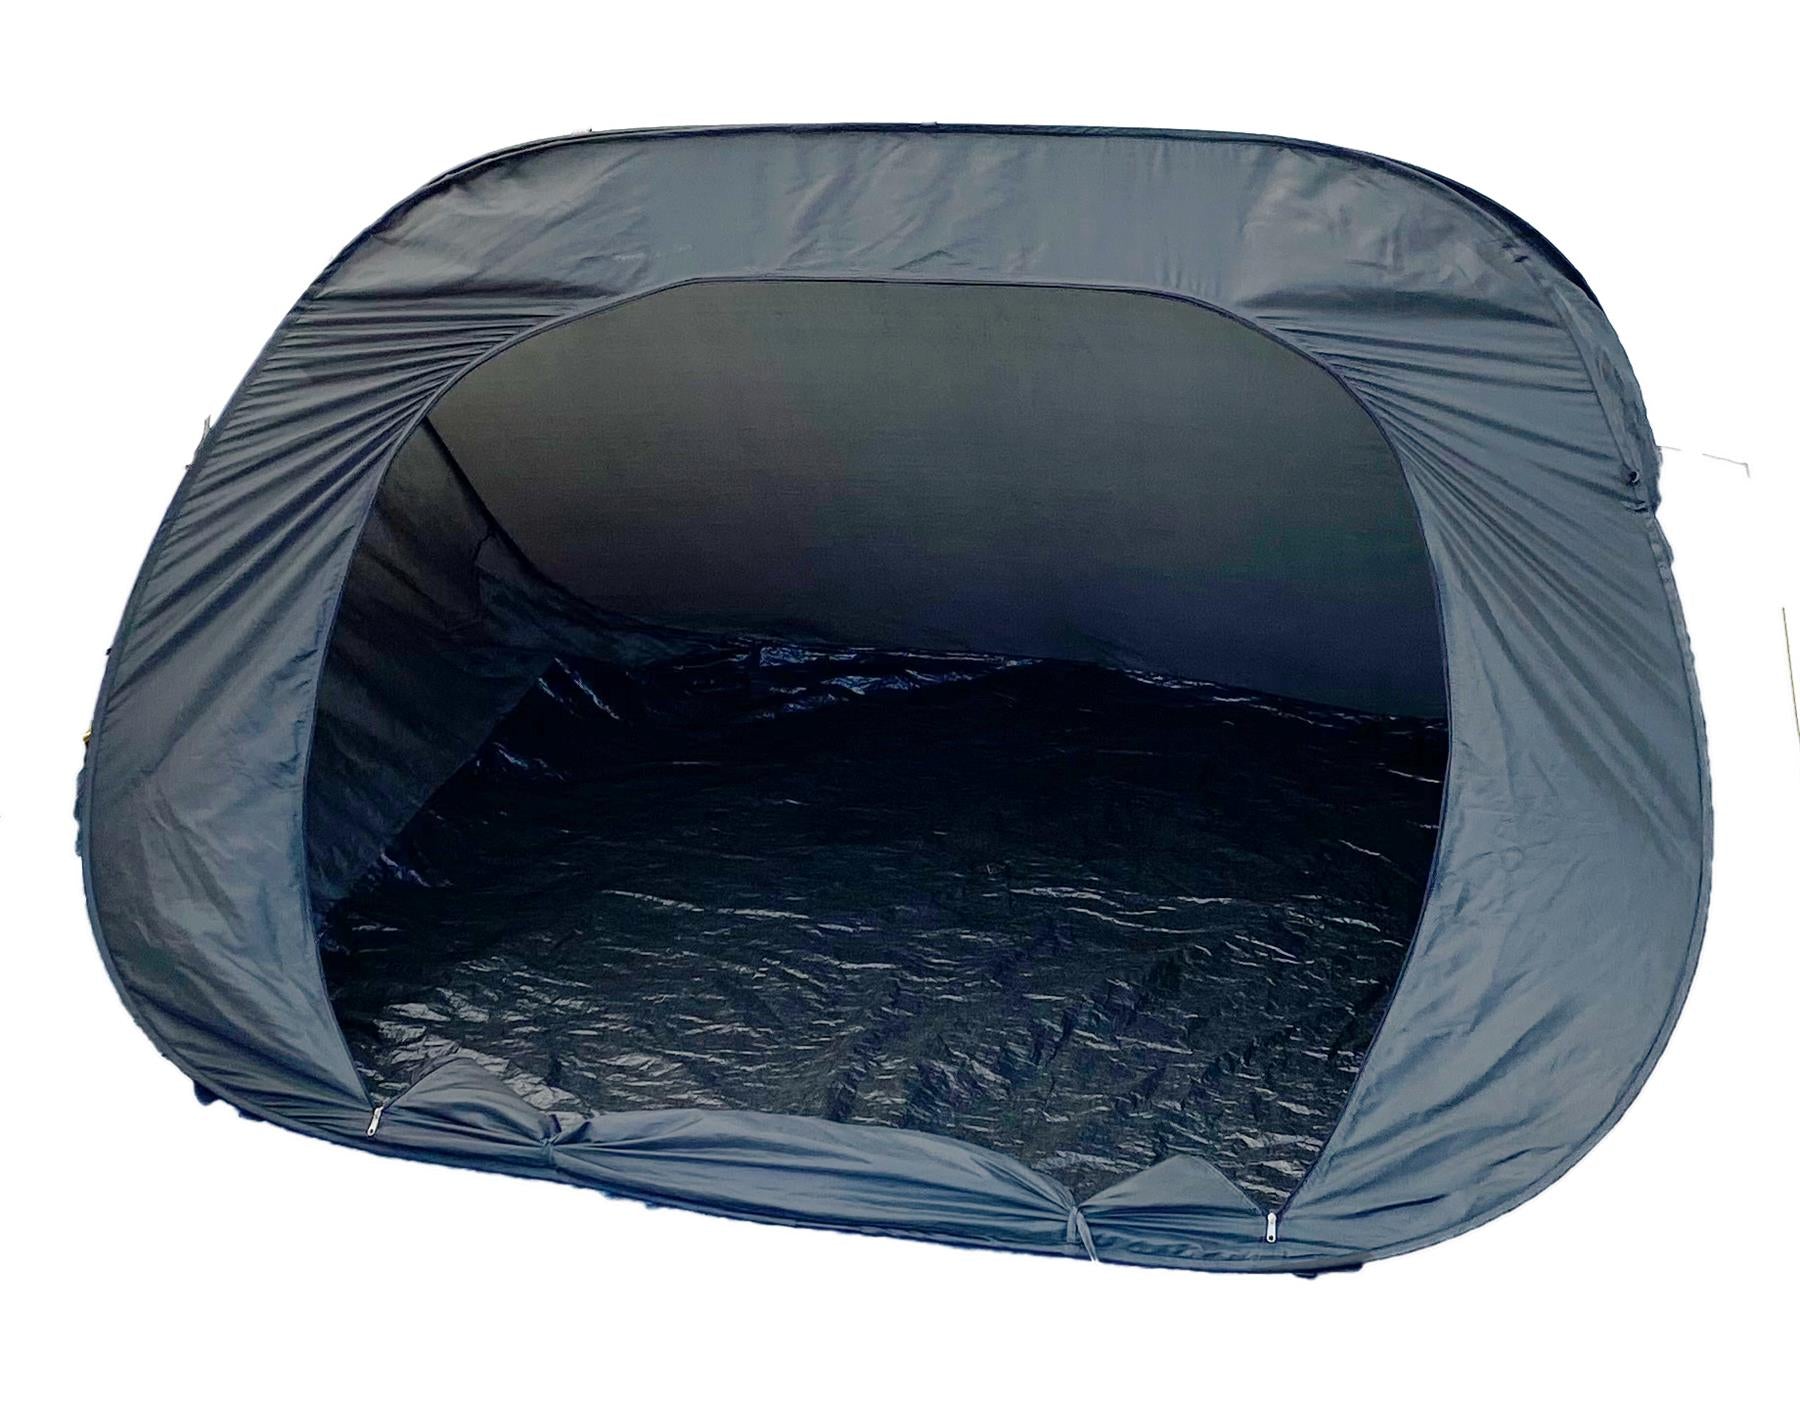 Universal Inner Tent 3 Berth for Awnings Tents Pop Up Bedroom No Hanging